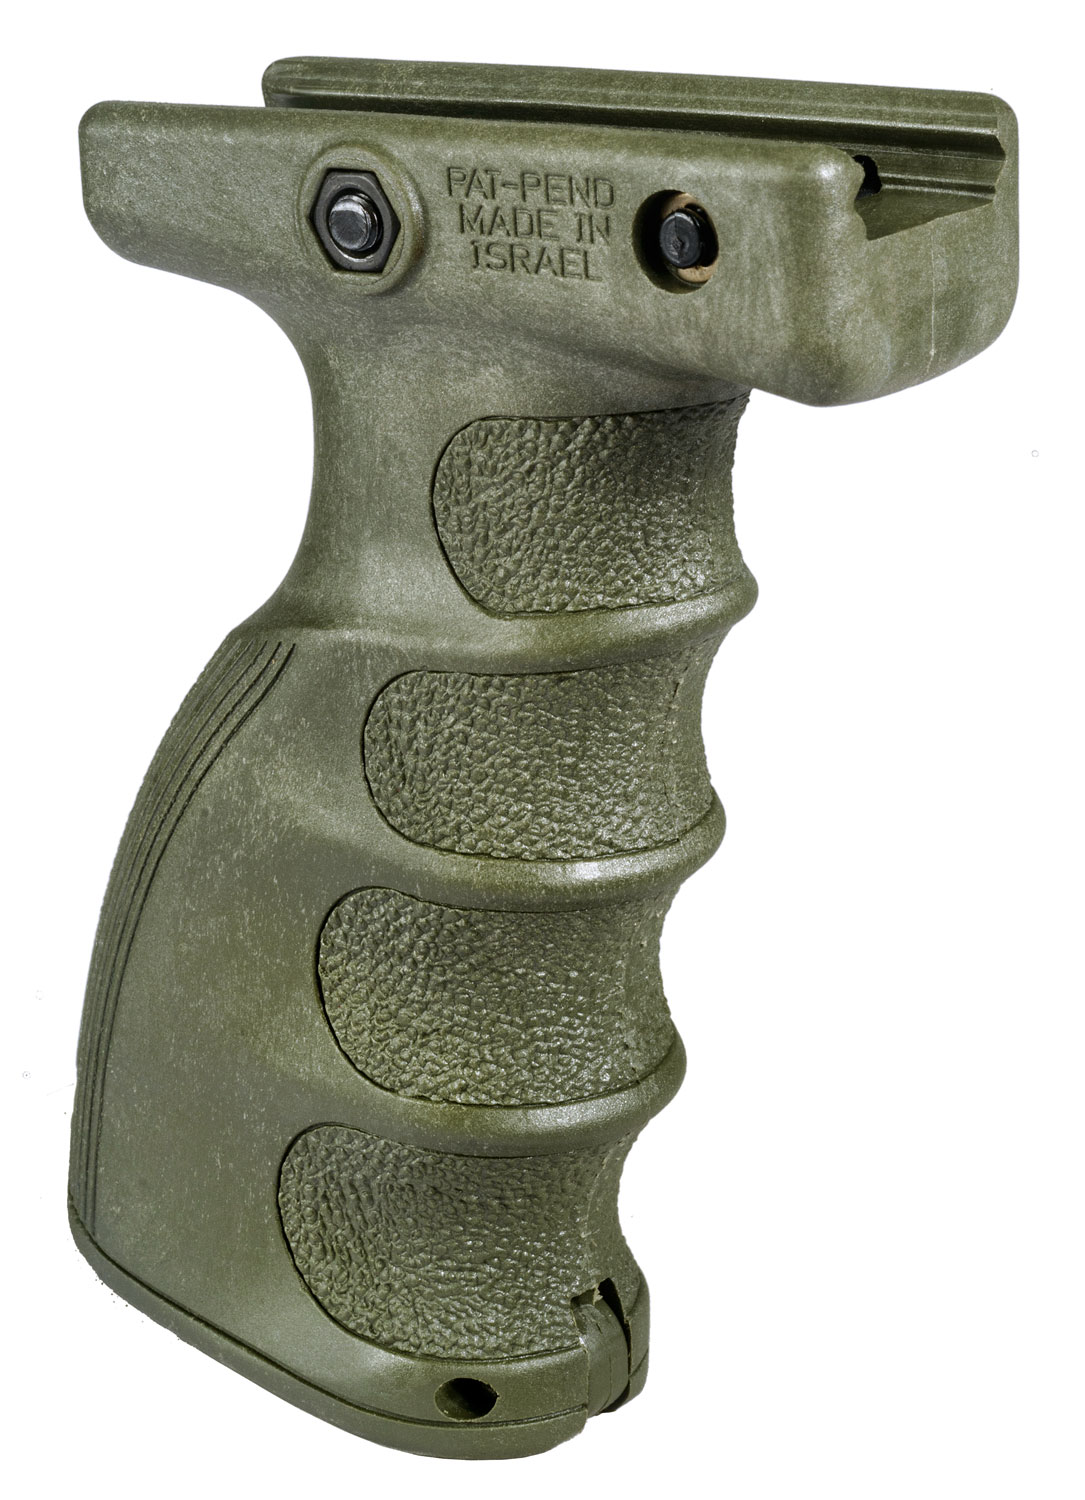 FAB Defense FXAG44SG AG-44S QR Ergonomic Foregrip Made of Polymer With OD Green Finish & Finger Grooves for Picatinny Rail